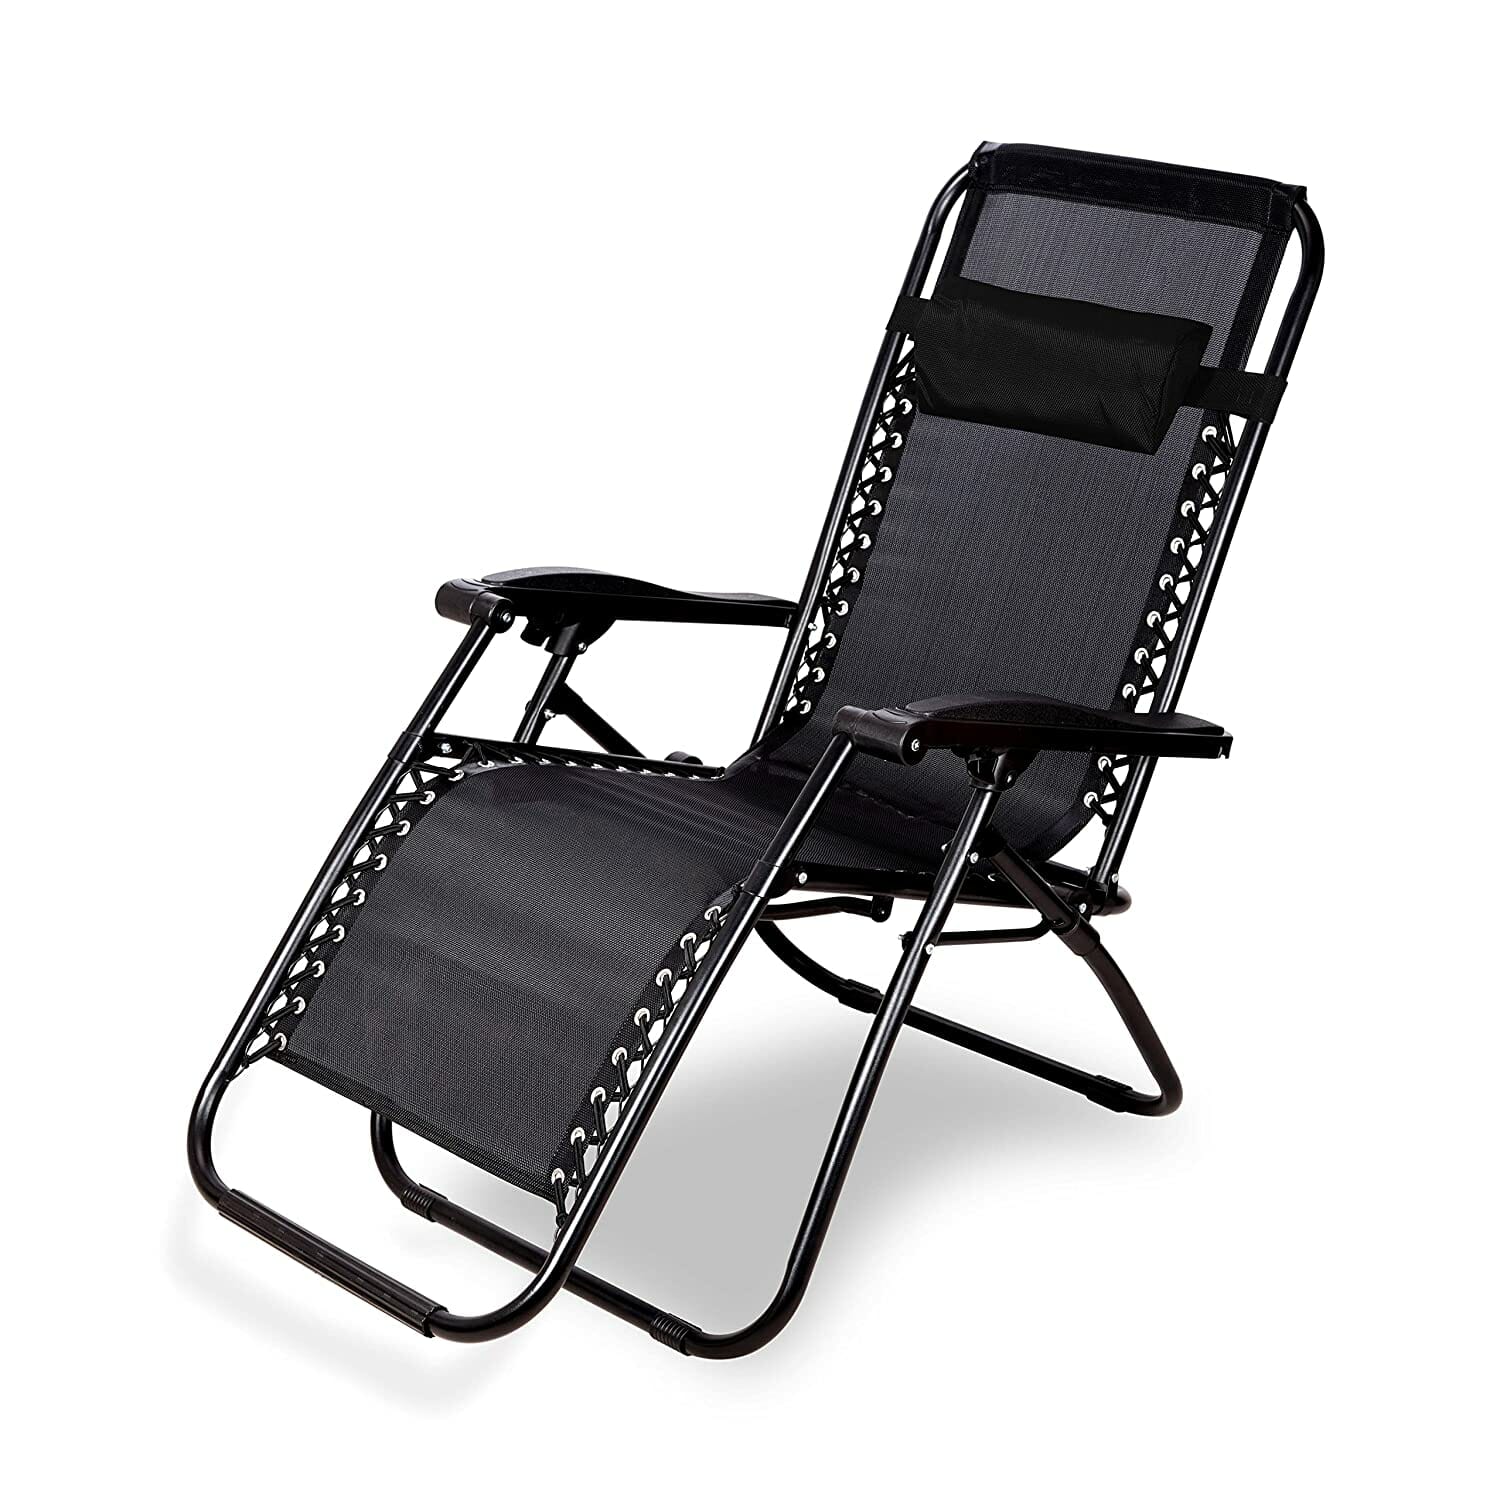 Zero Gravity Relax Chair For Lounge,Easy Chair for Lawn | Portable and Foldable Recliner Chair for Resting